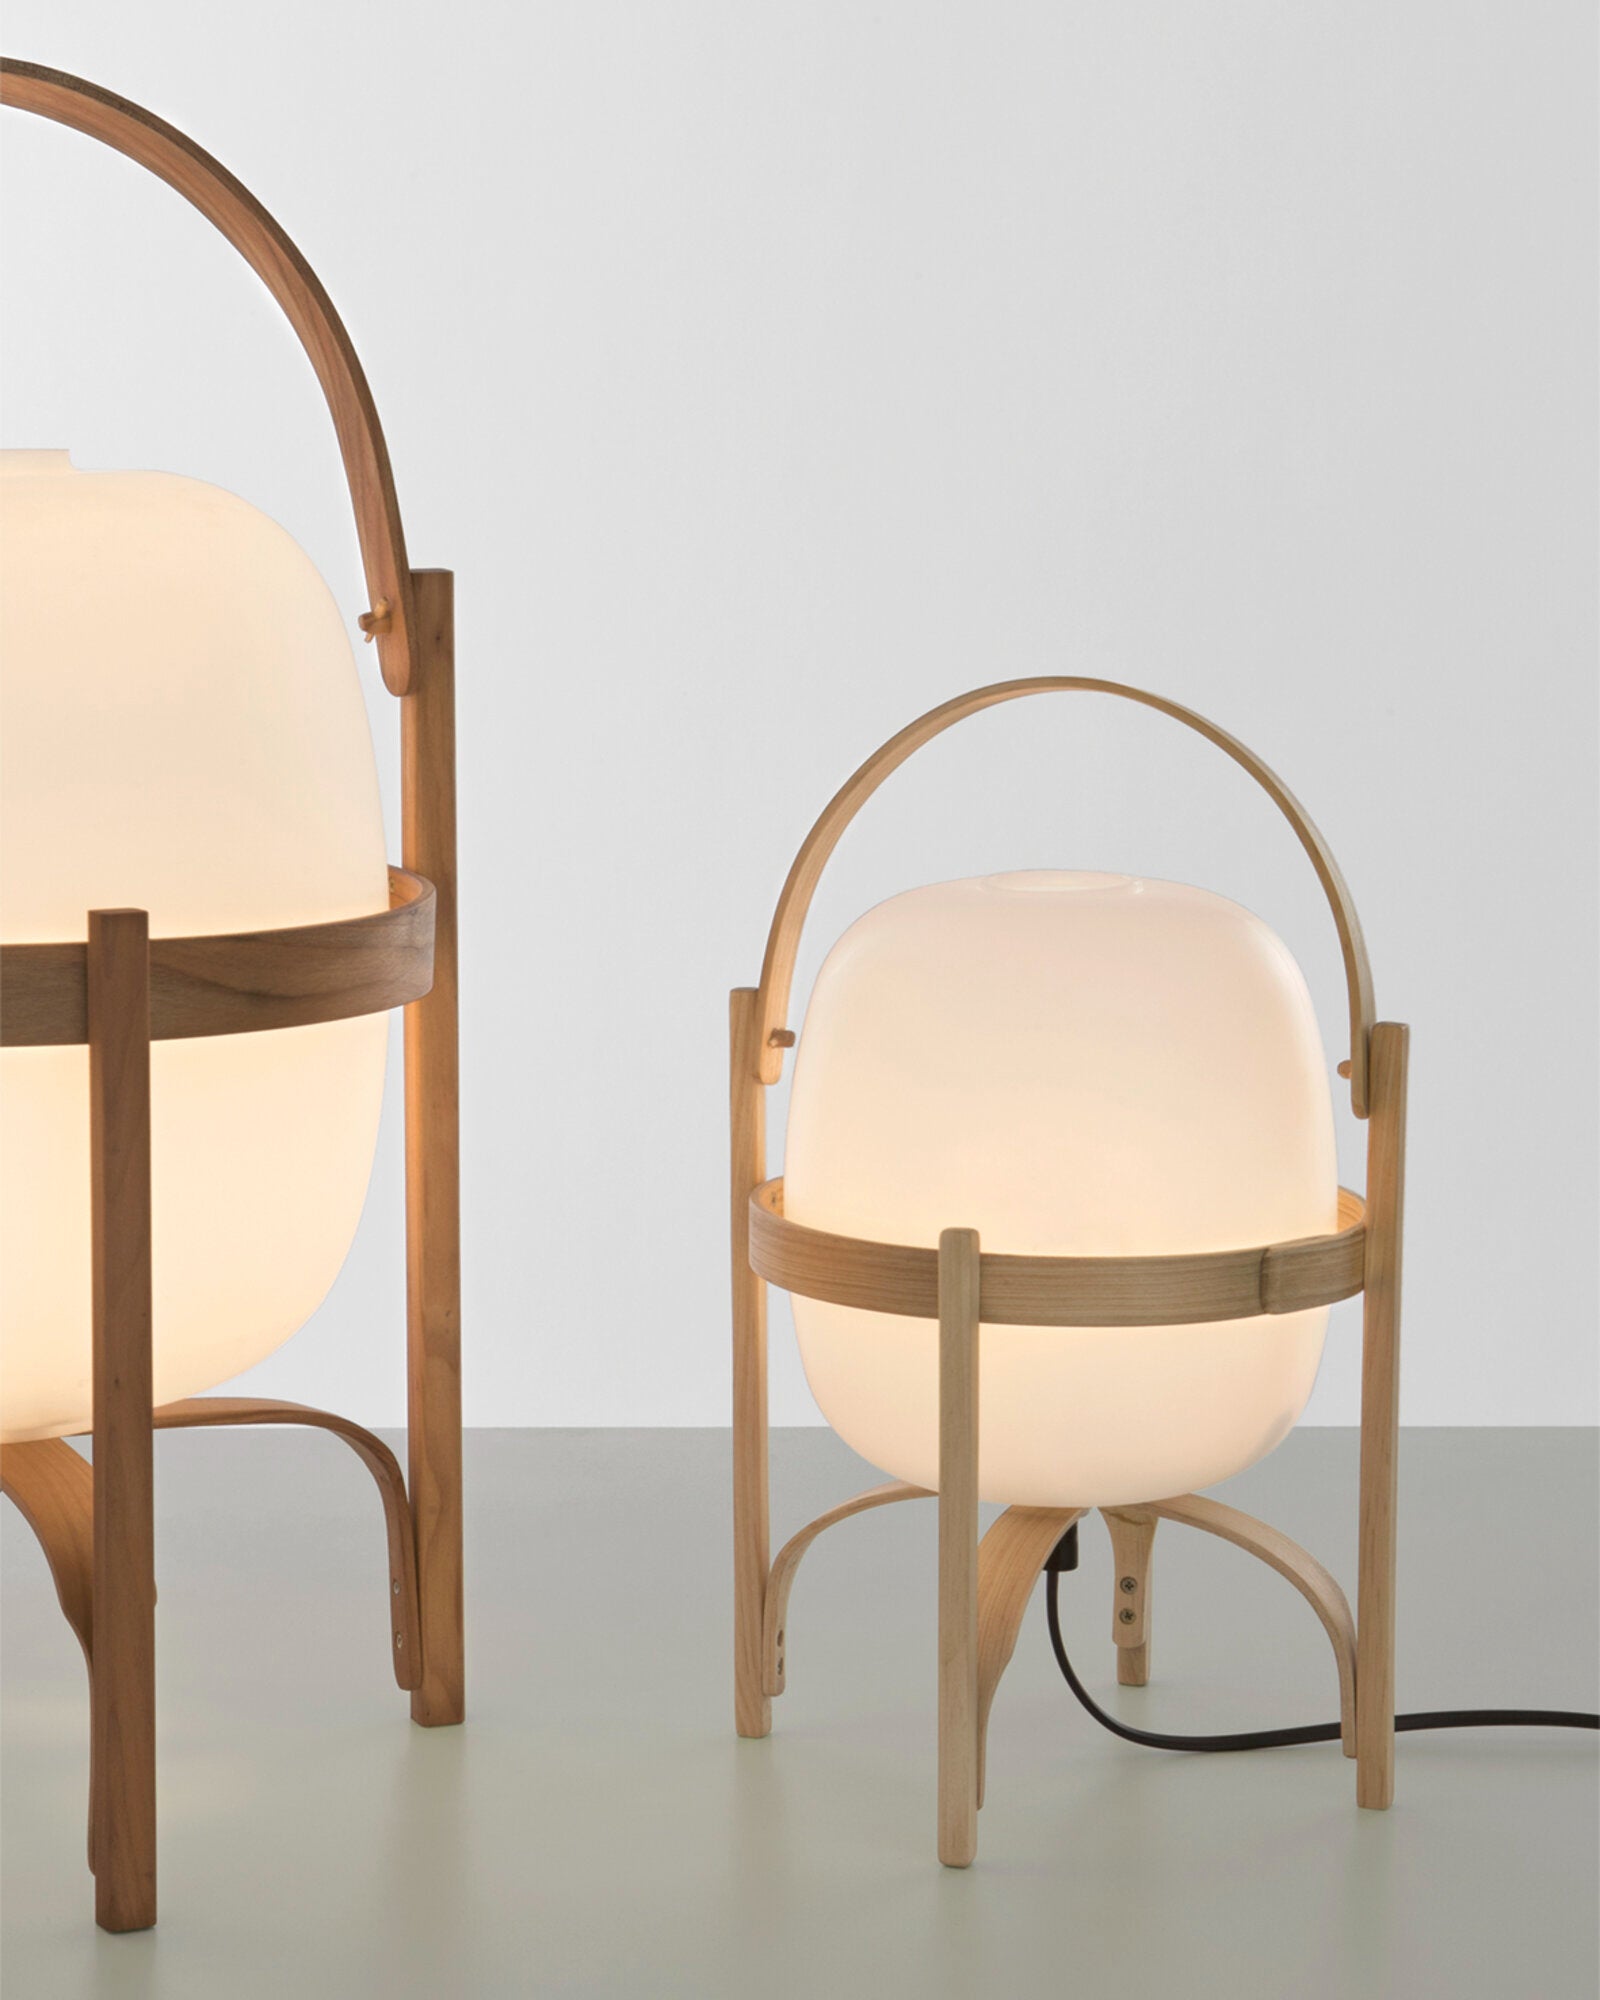 Contemporary table lamp called the Cestita Table Lamp by Santa & Cole